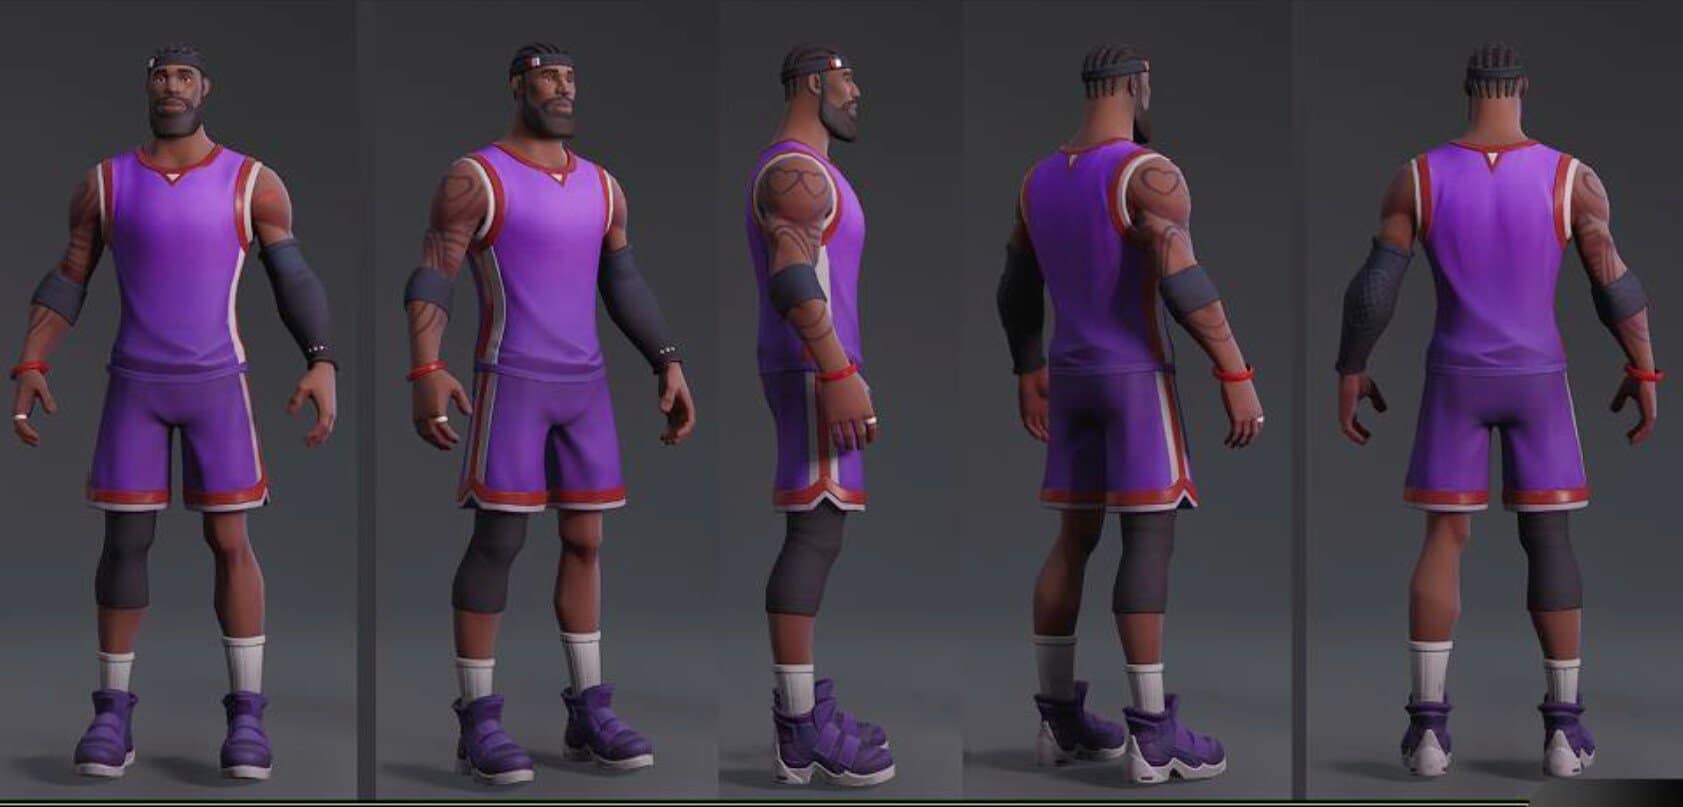 NBA basketball event in Fortnite: V-Bucks challenges and LeBron outfit